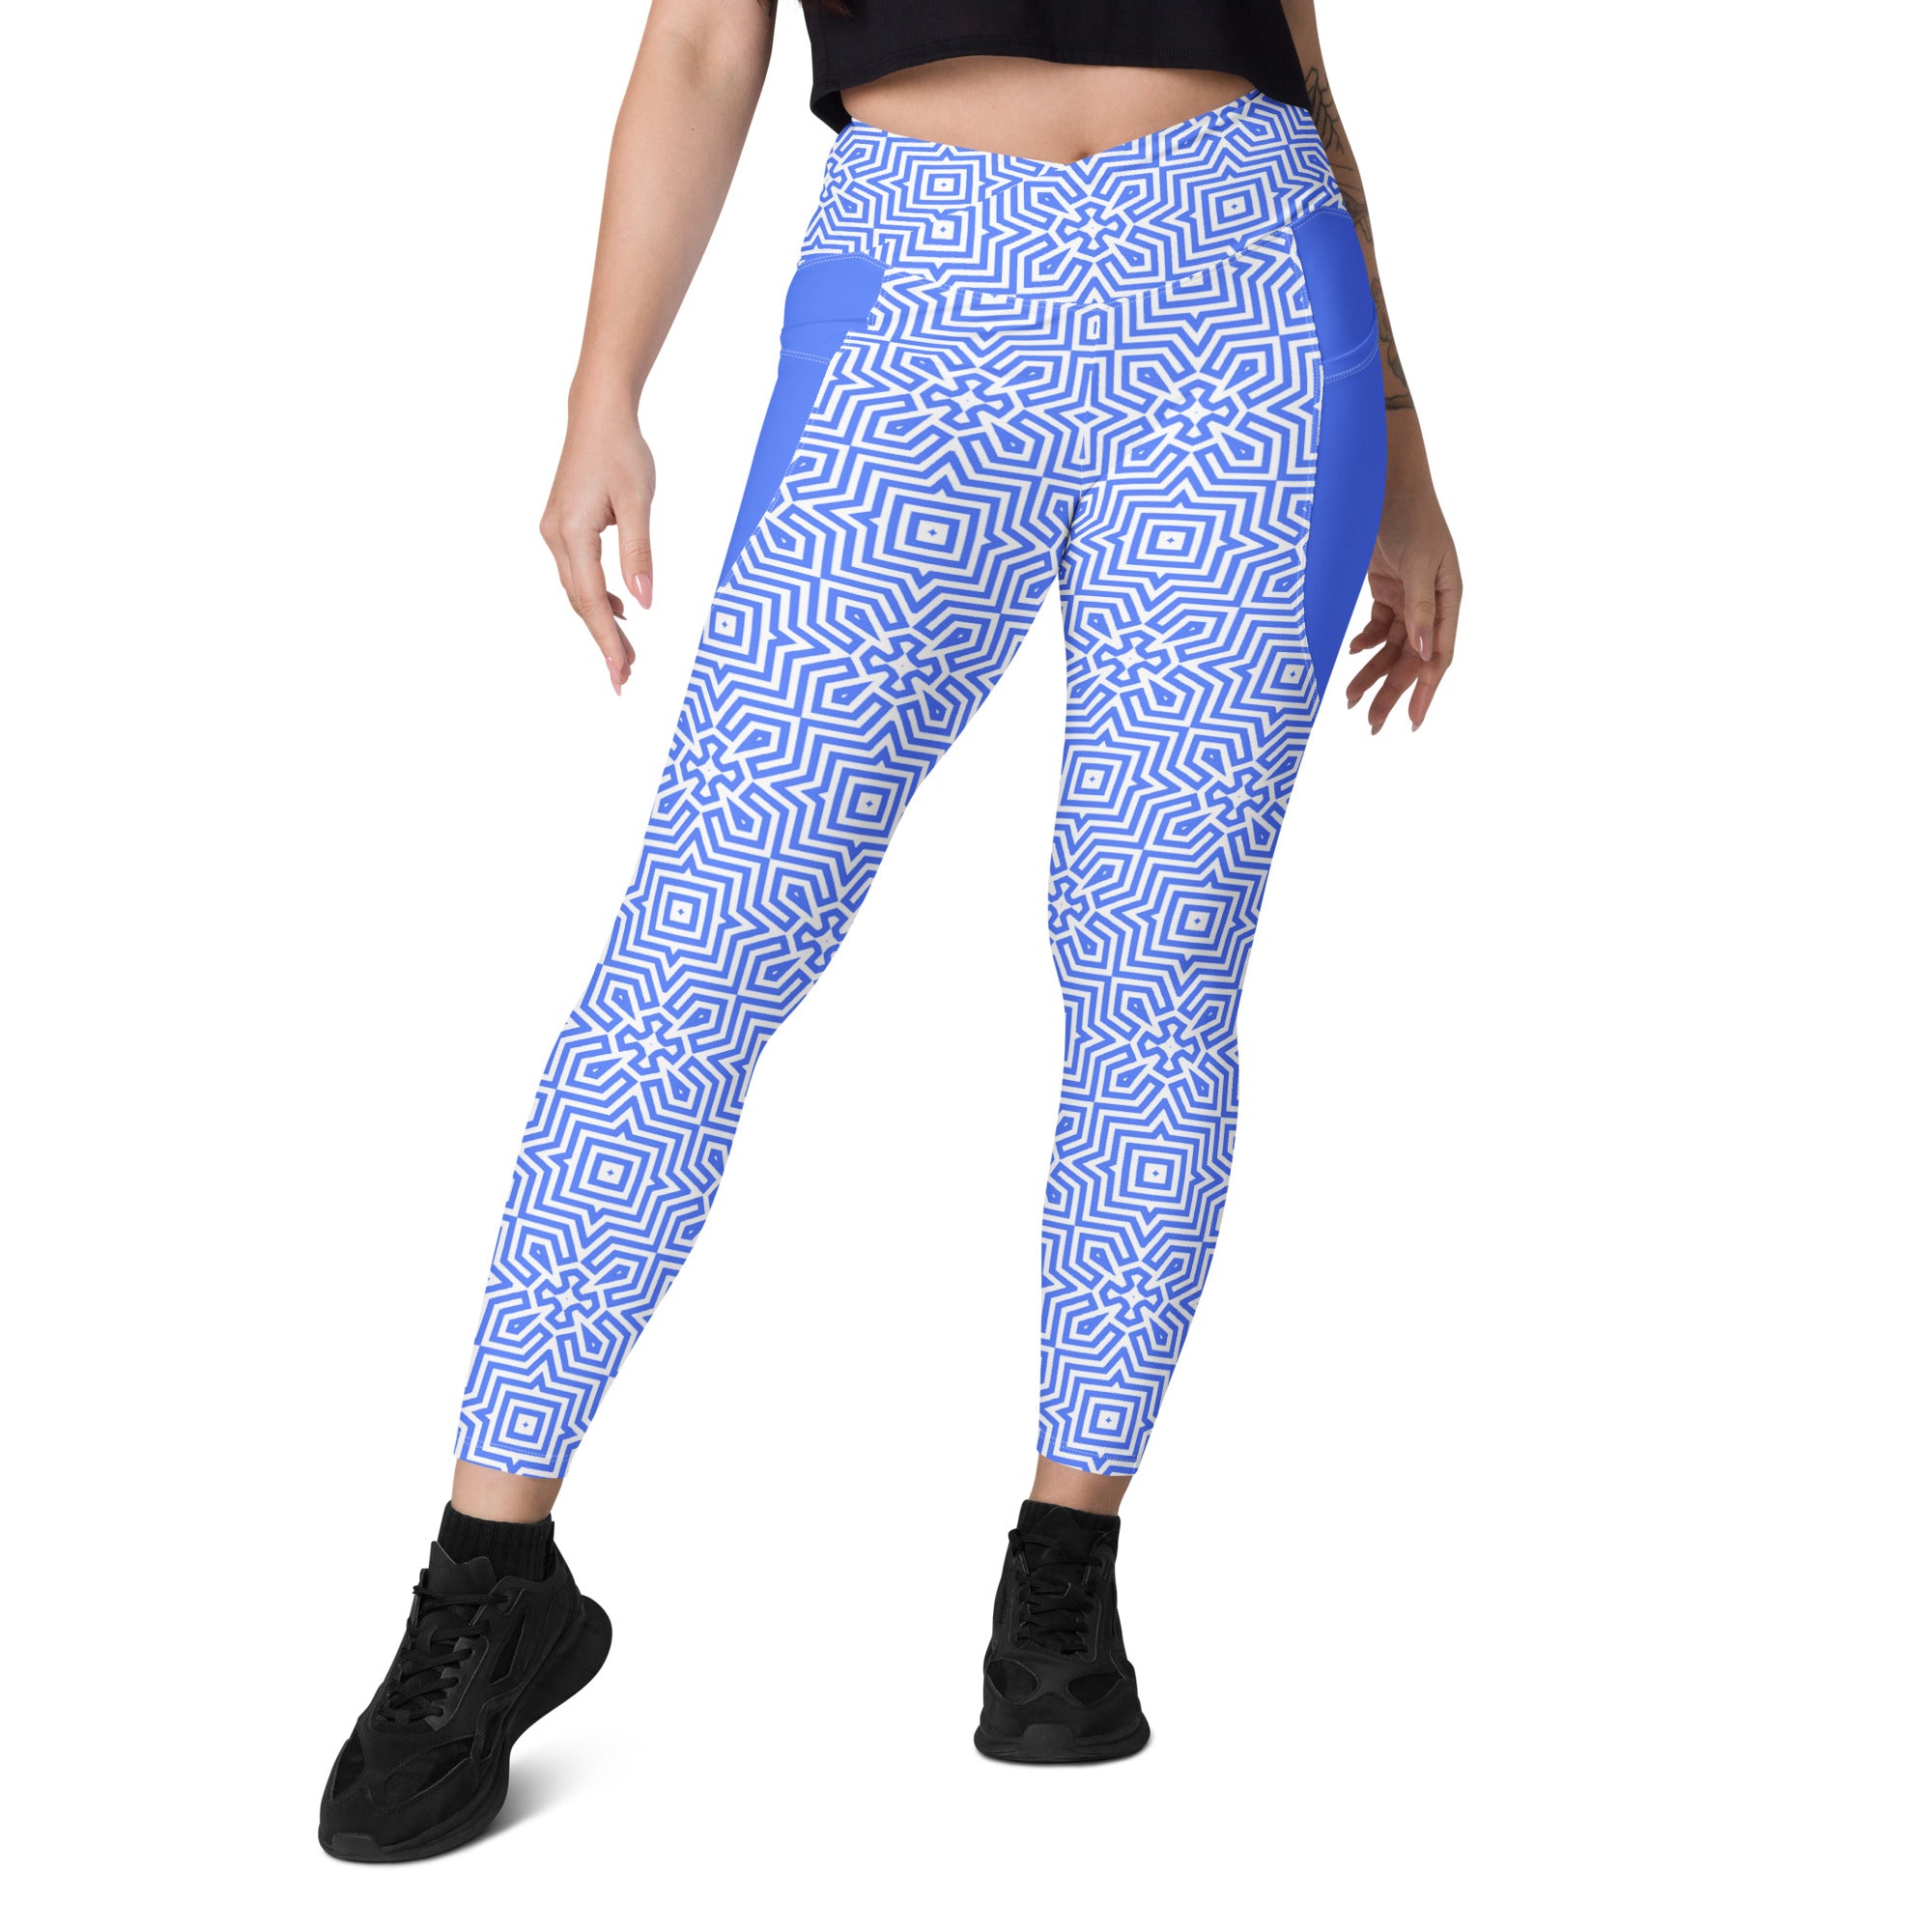 Chevron-patterned crossover leggings with side pockets.